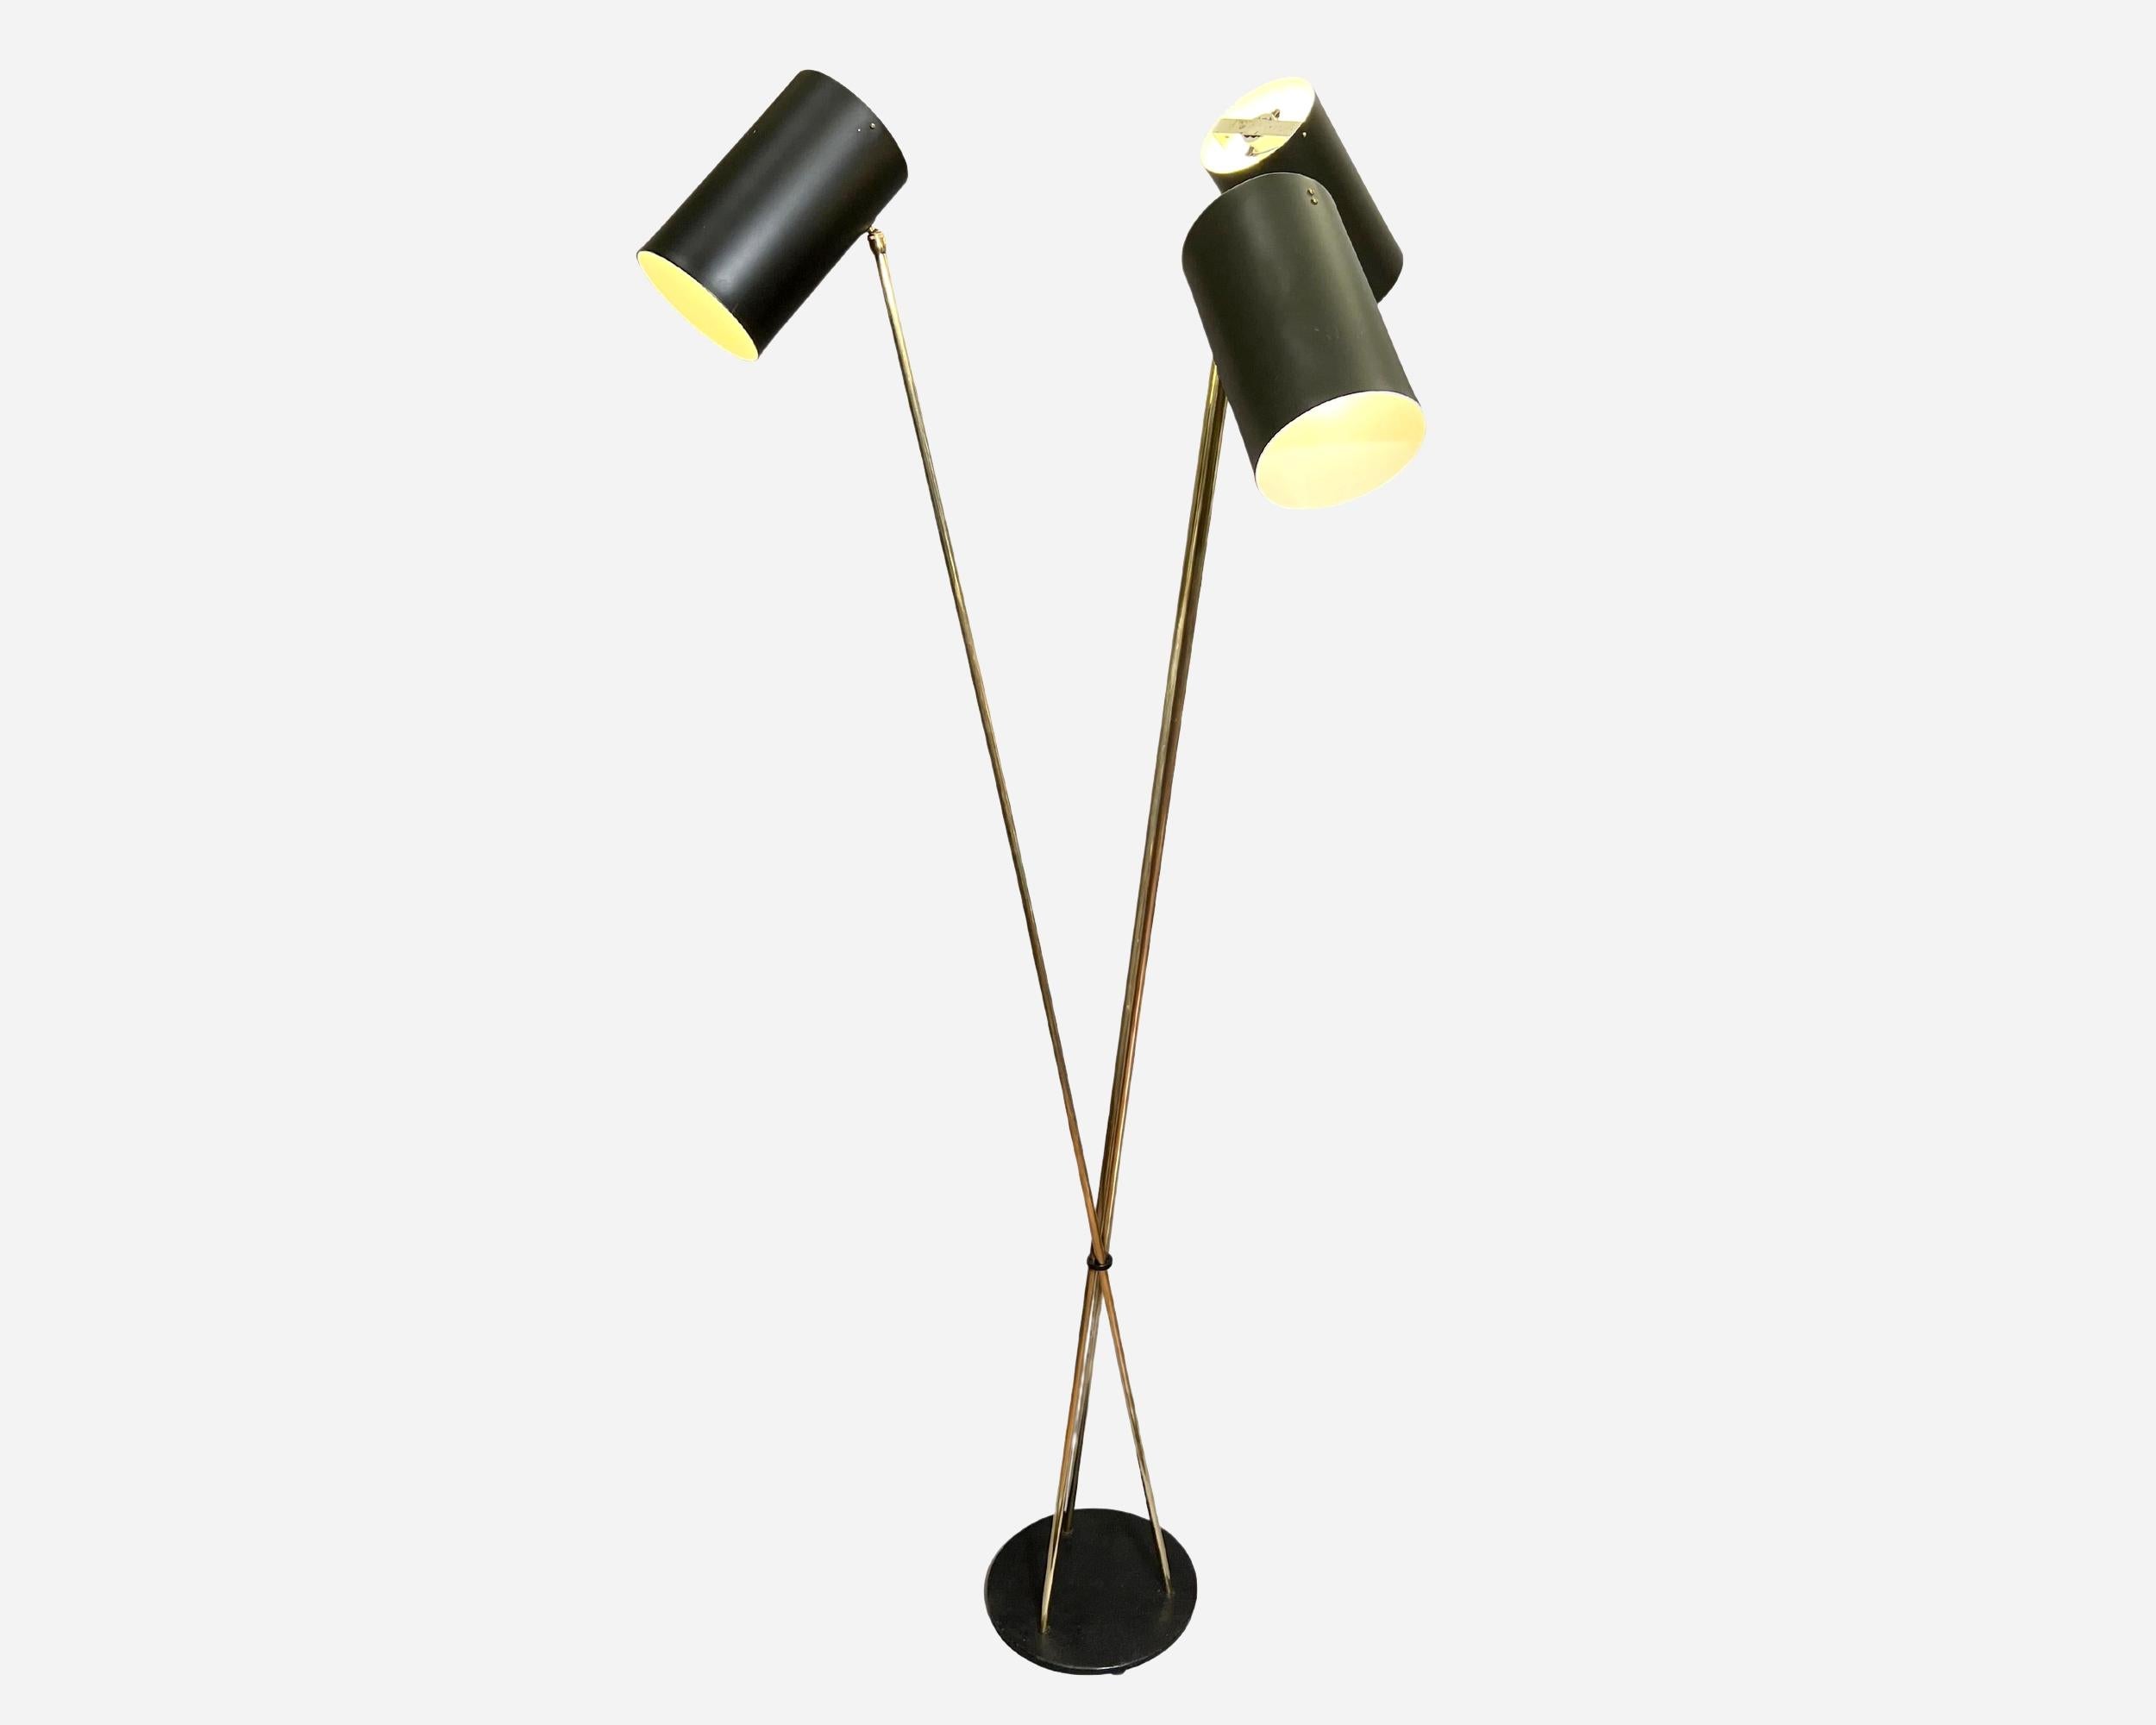 Large 1950’s floor lamp in the spirit of the Maison Lunel, made in France.
Three interlocking polished brass rods are fixed to a black lacquered metal base and support three adjustable shades (on ball joint) in black lacquered sheet metal with white